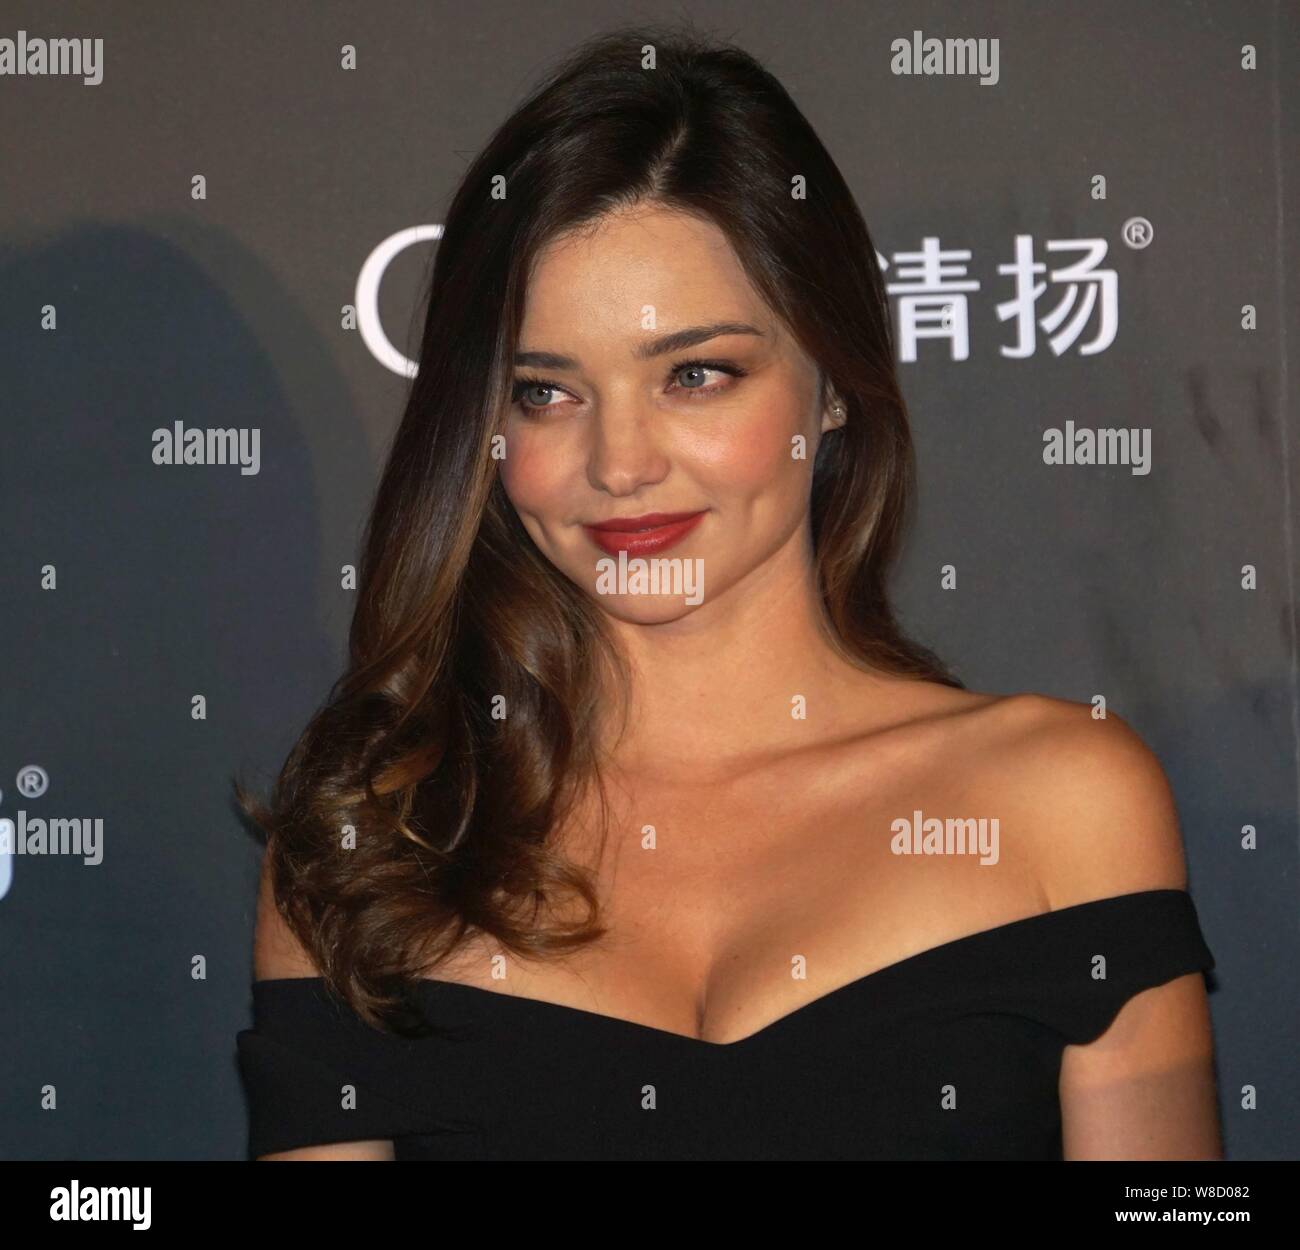 Australian model Miranda Kerr poses at a promotional event for Clear Shampoo in Shanghai, China, 18 June 2015. Stock Photo